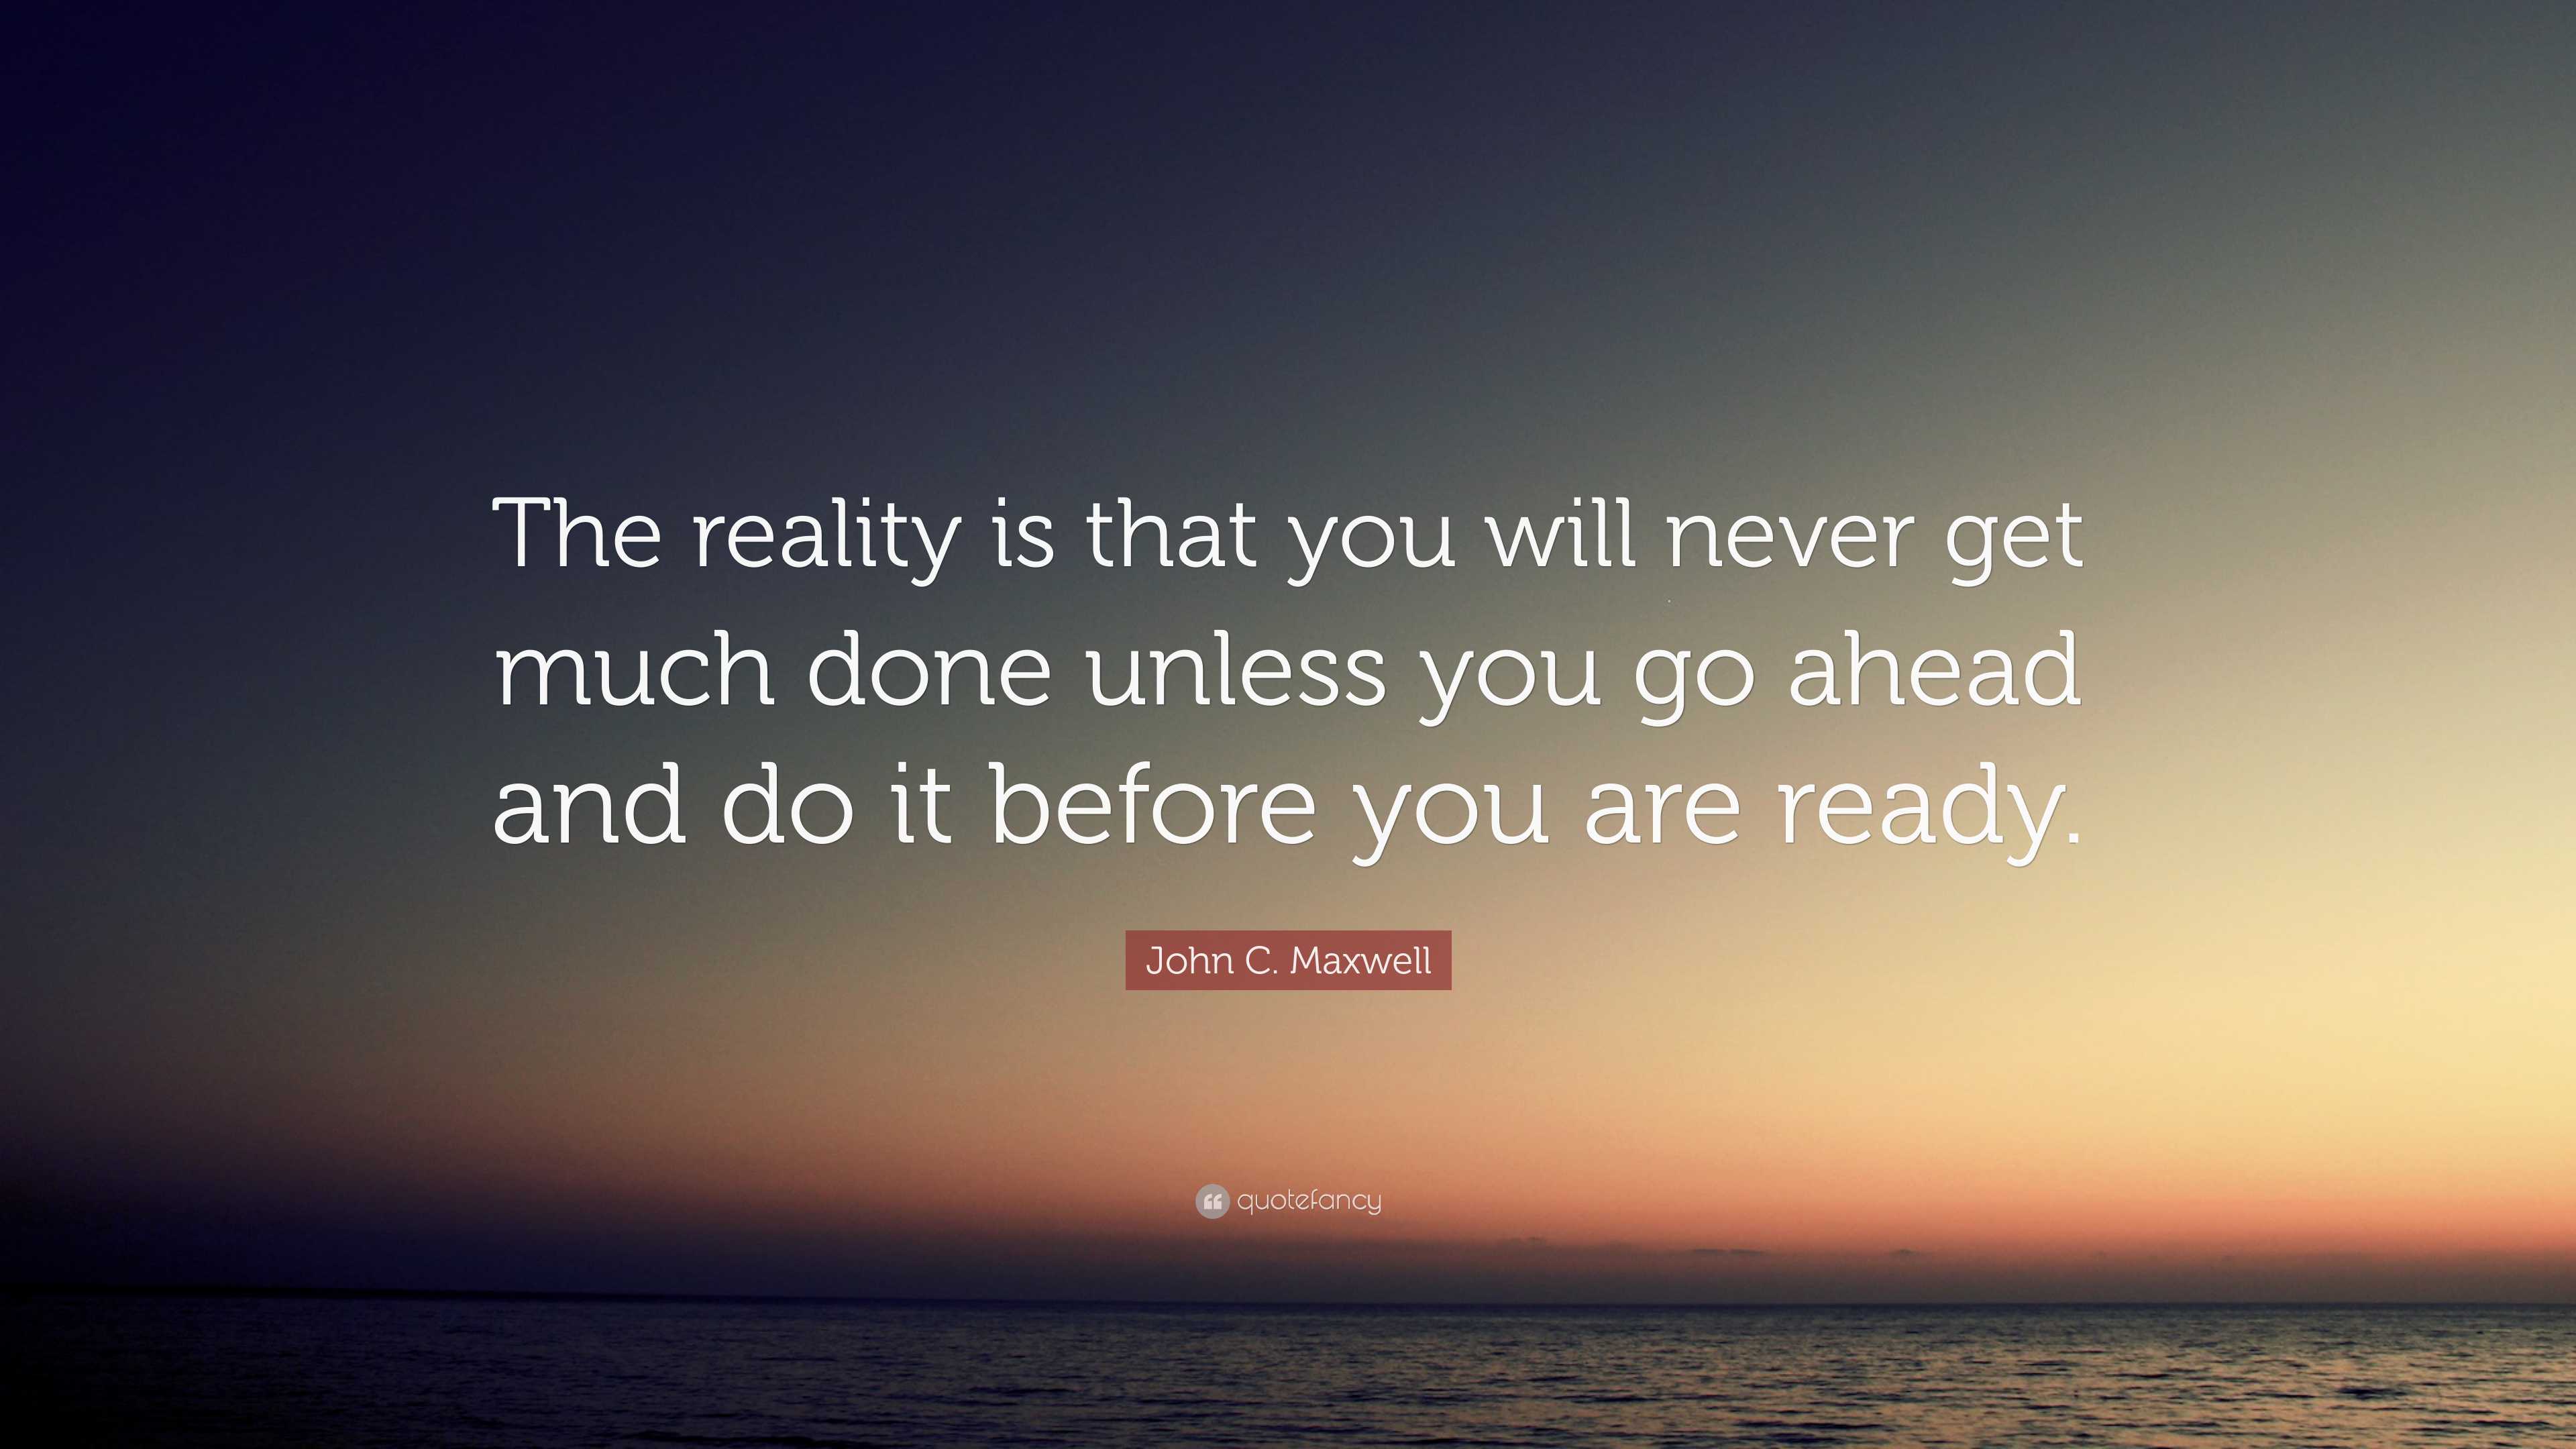 John C. Maxwell Quote: “The reality is that you will never get much ...